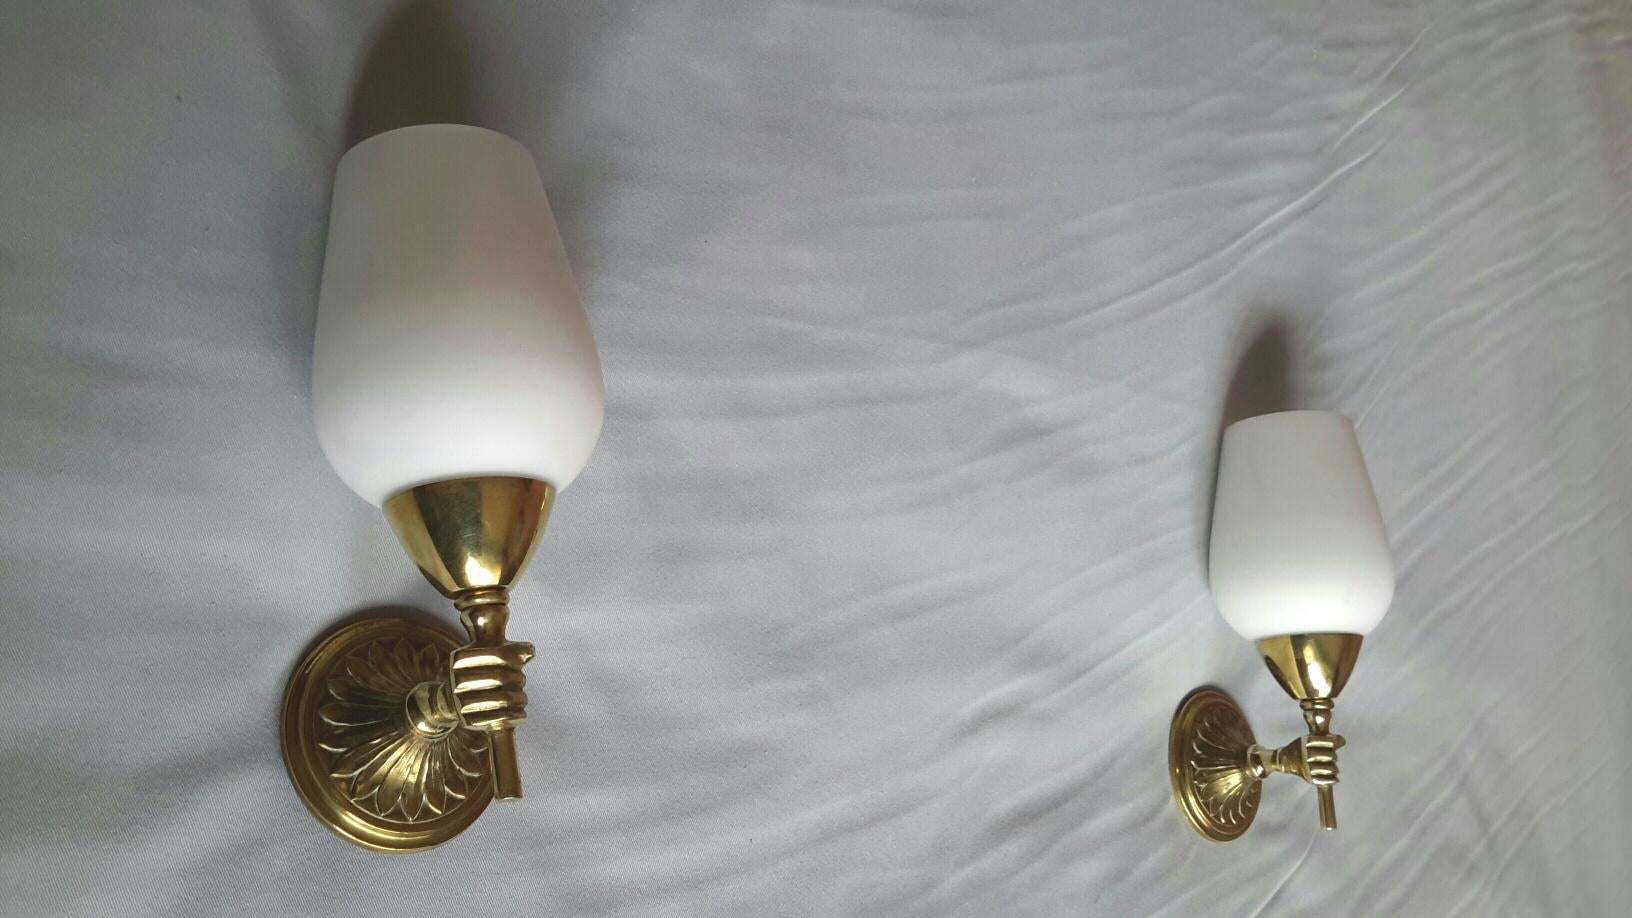 Charming original pair of neoclassical bronze sconces with white opaline lampshades tulips and figuring small hands torchère holding it in the style of the French Maison Jansen, France, circa 1950.
In a very good condition, rewired to fit the US